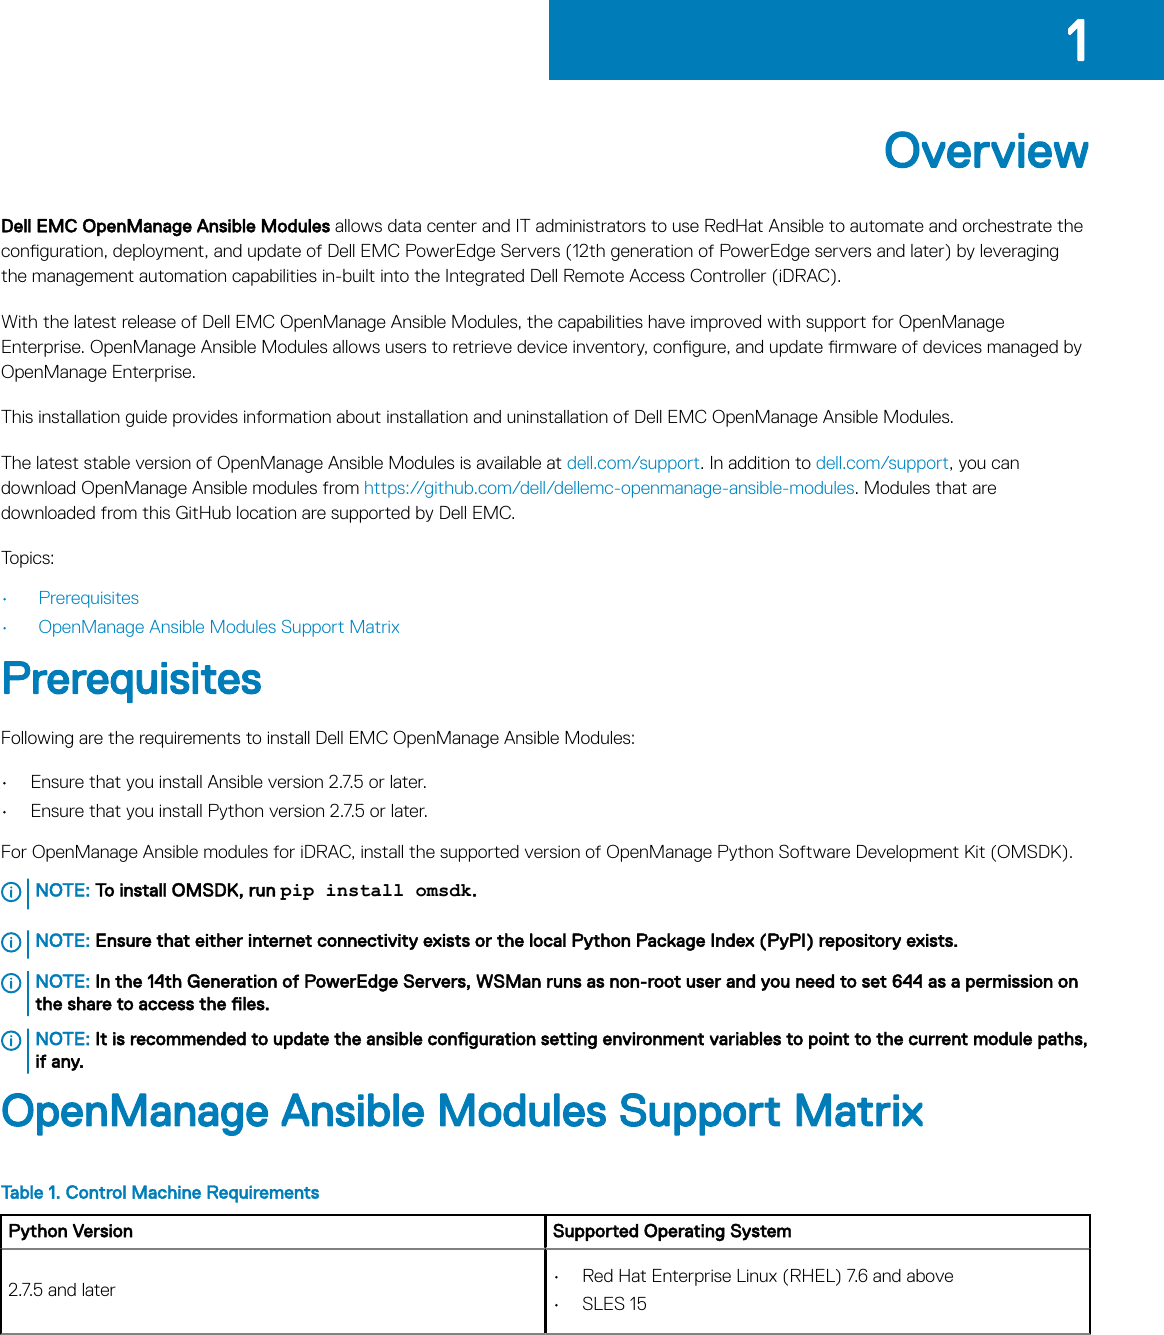 Page 4 of 7 - Dell EMC OpenManage Ansible Modules Version 1.3 Installation Guide OMAM Install